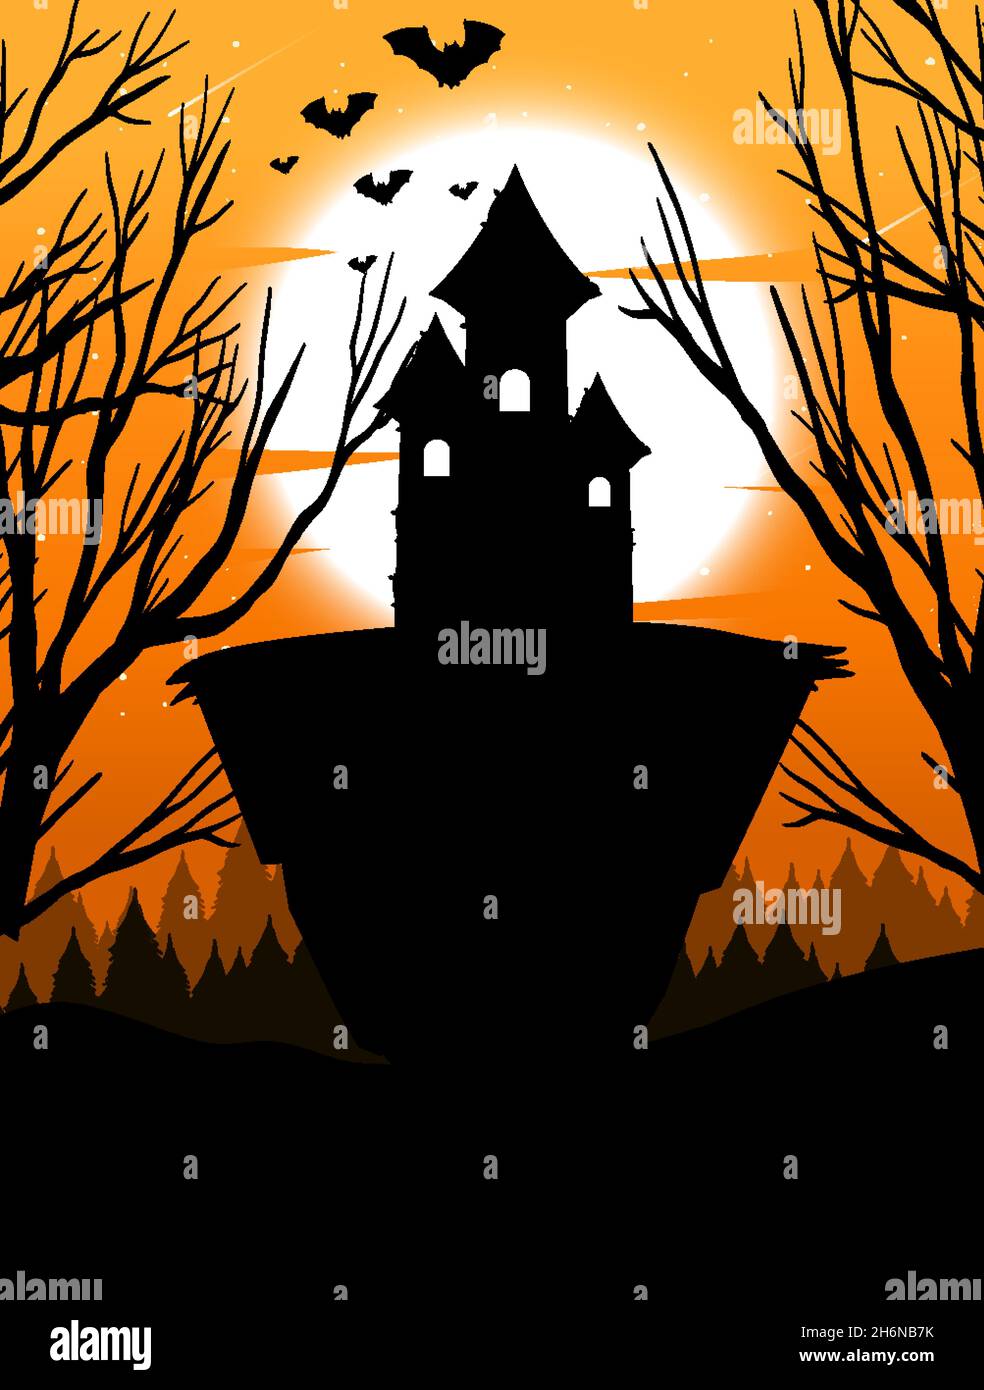 Silhouette castle with full moon background illustration Stock Vector ...